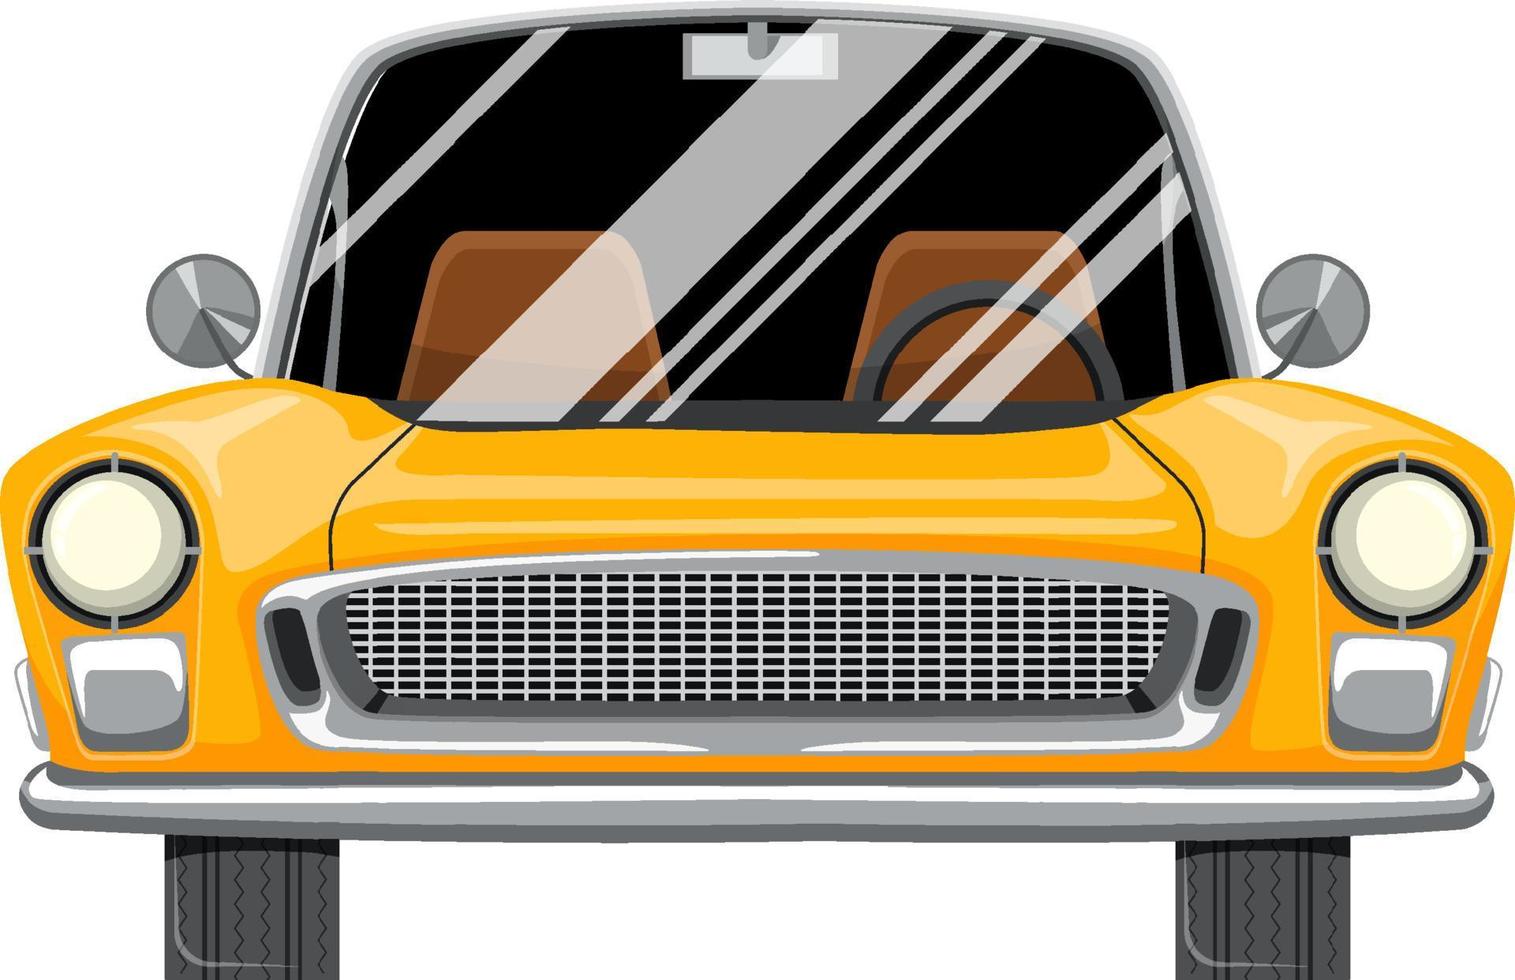 Classic yellow car in cartoon style vector